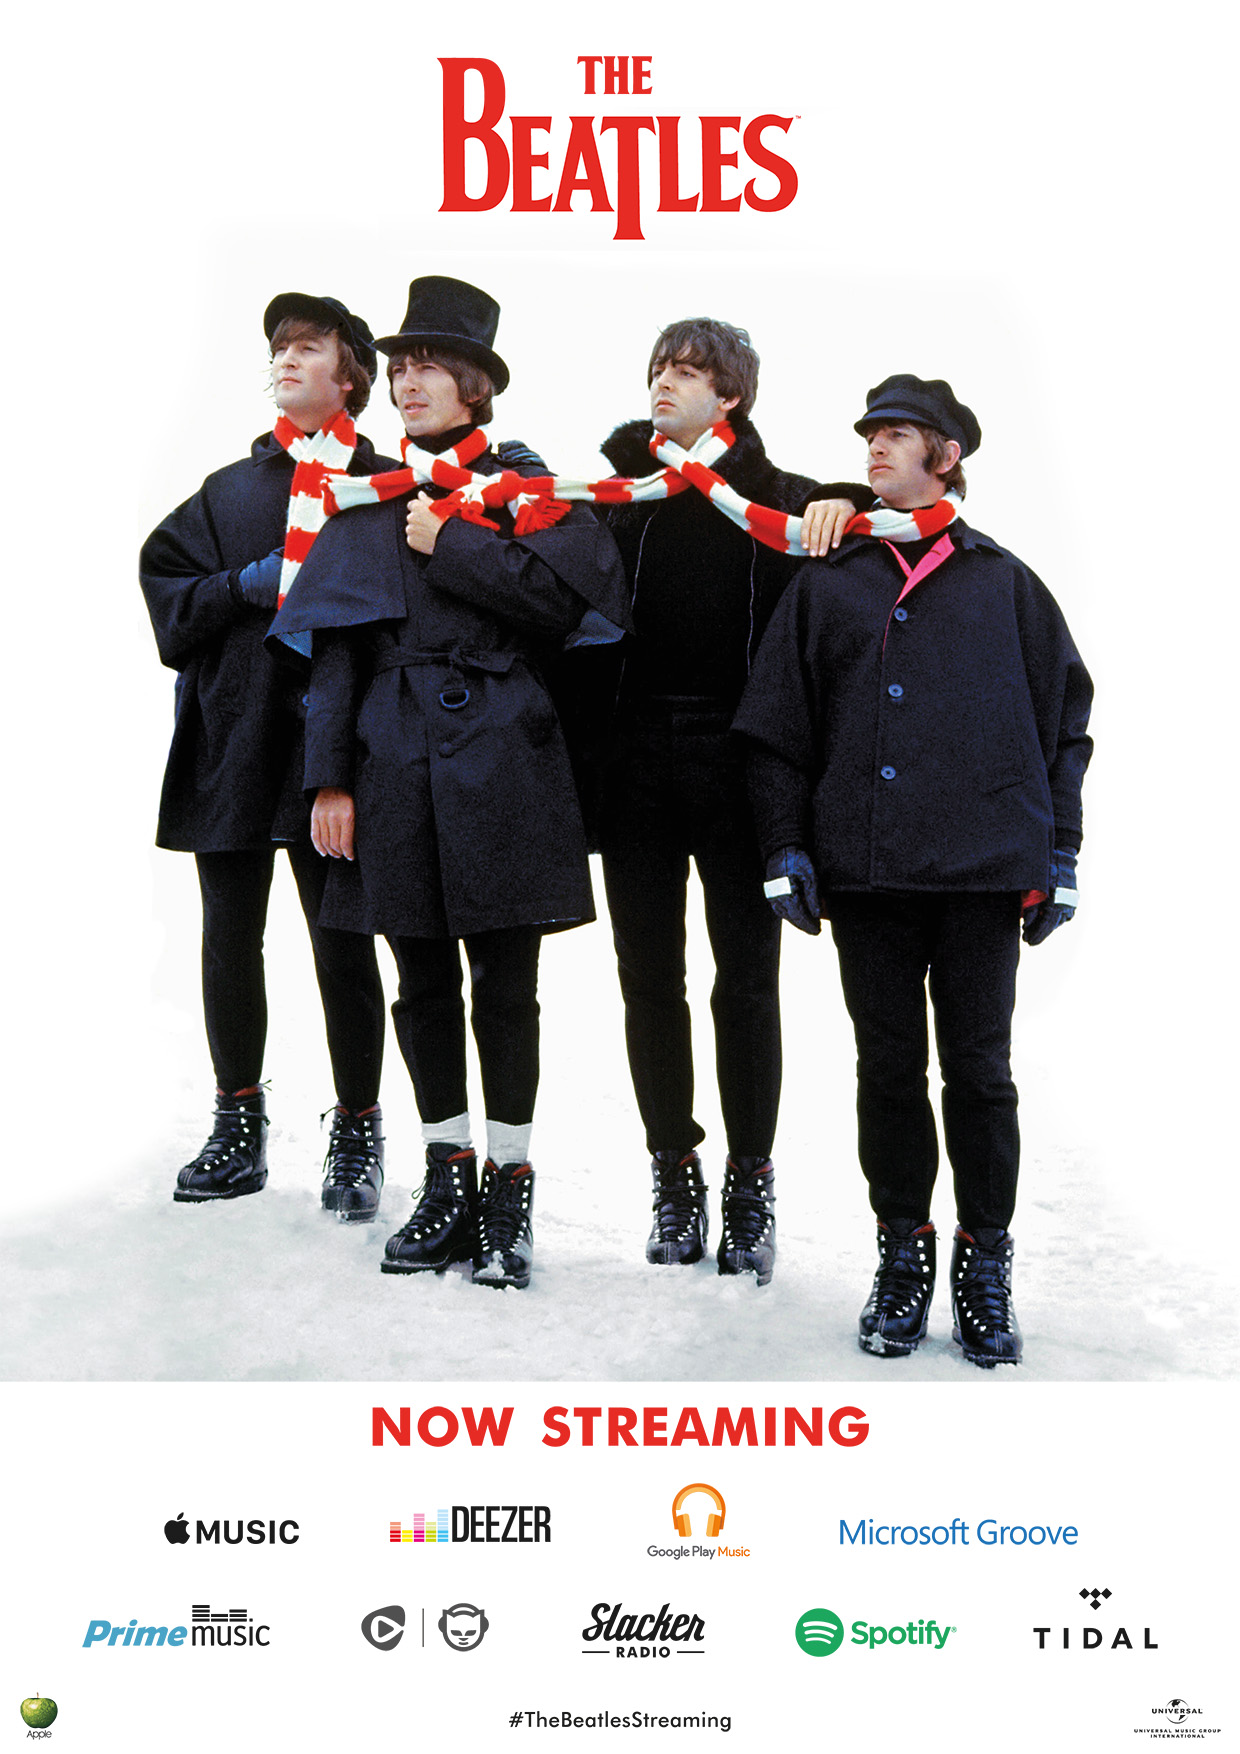 The Beatles now streaming